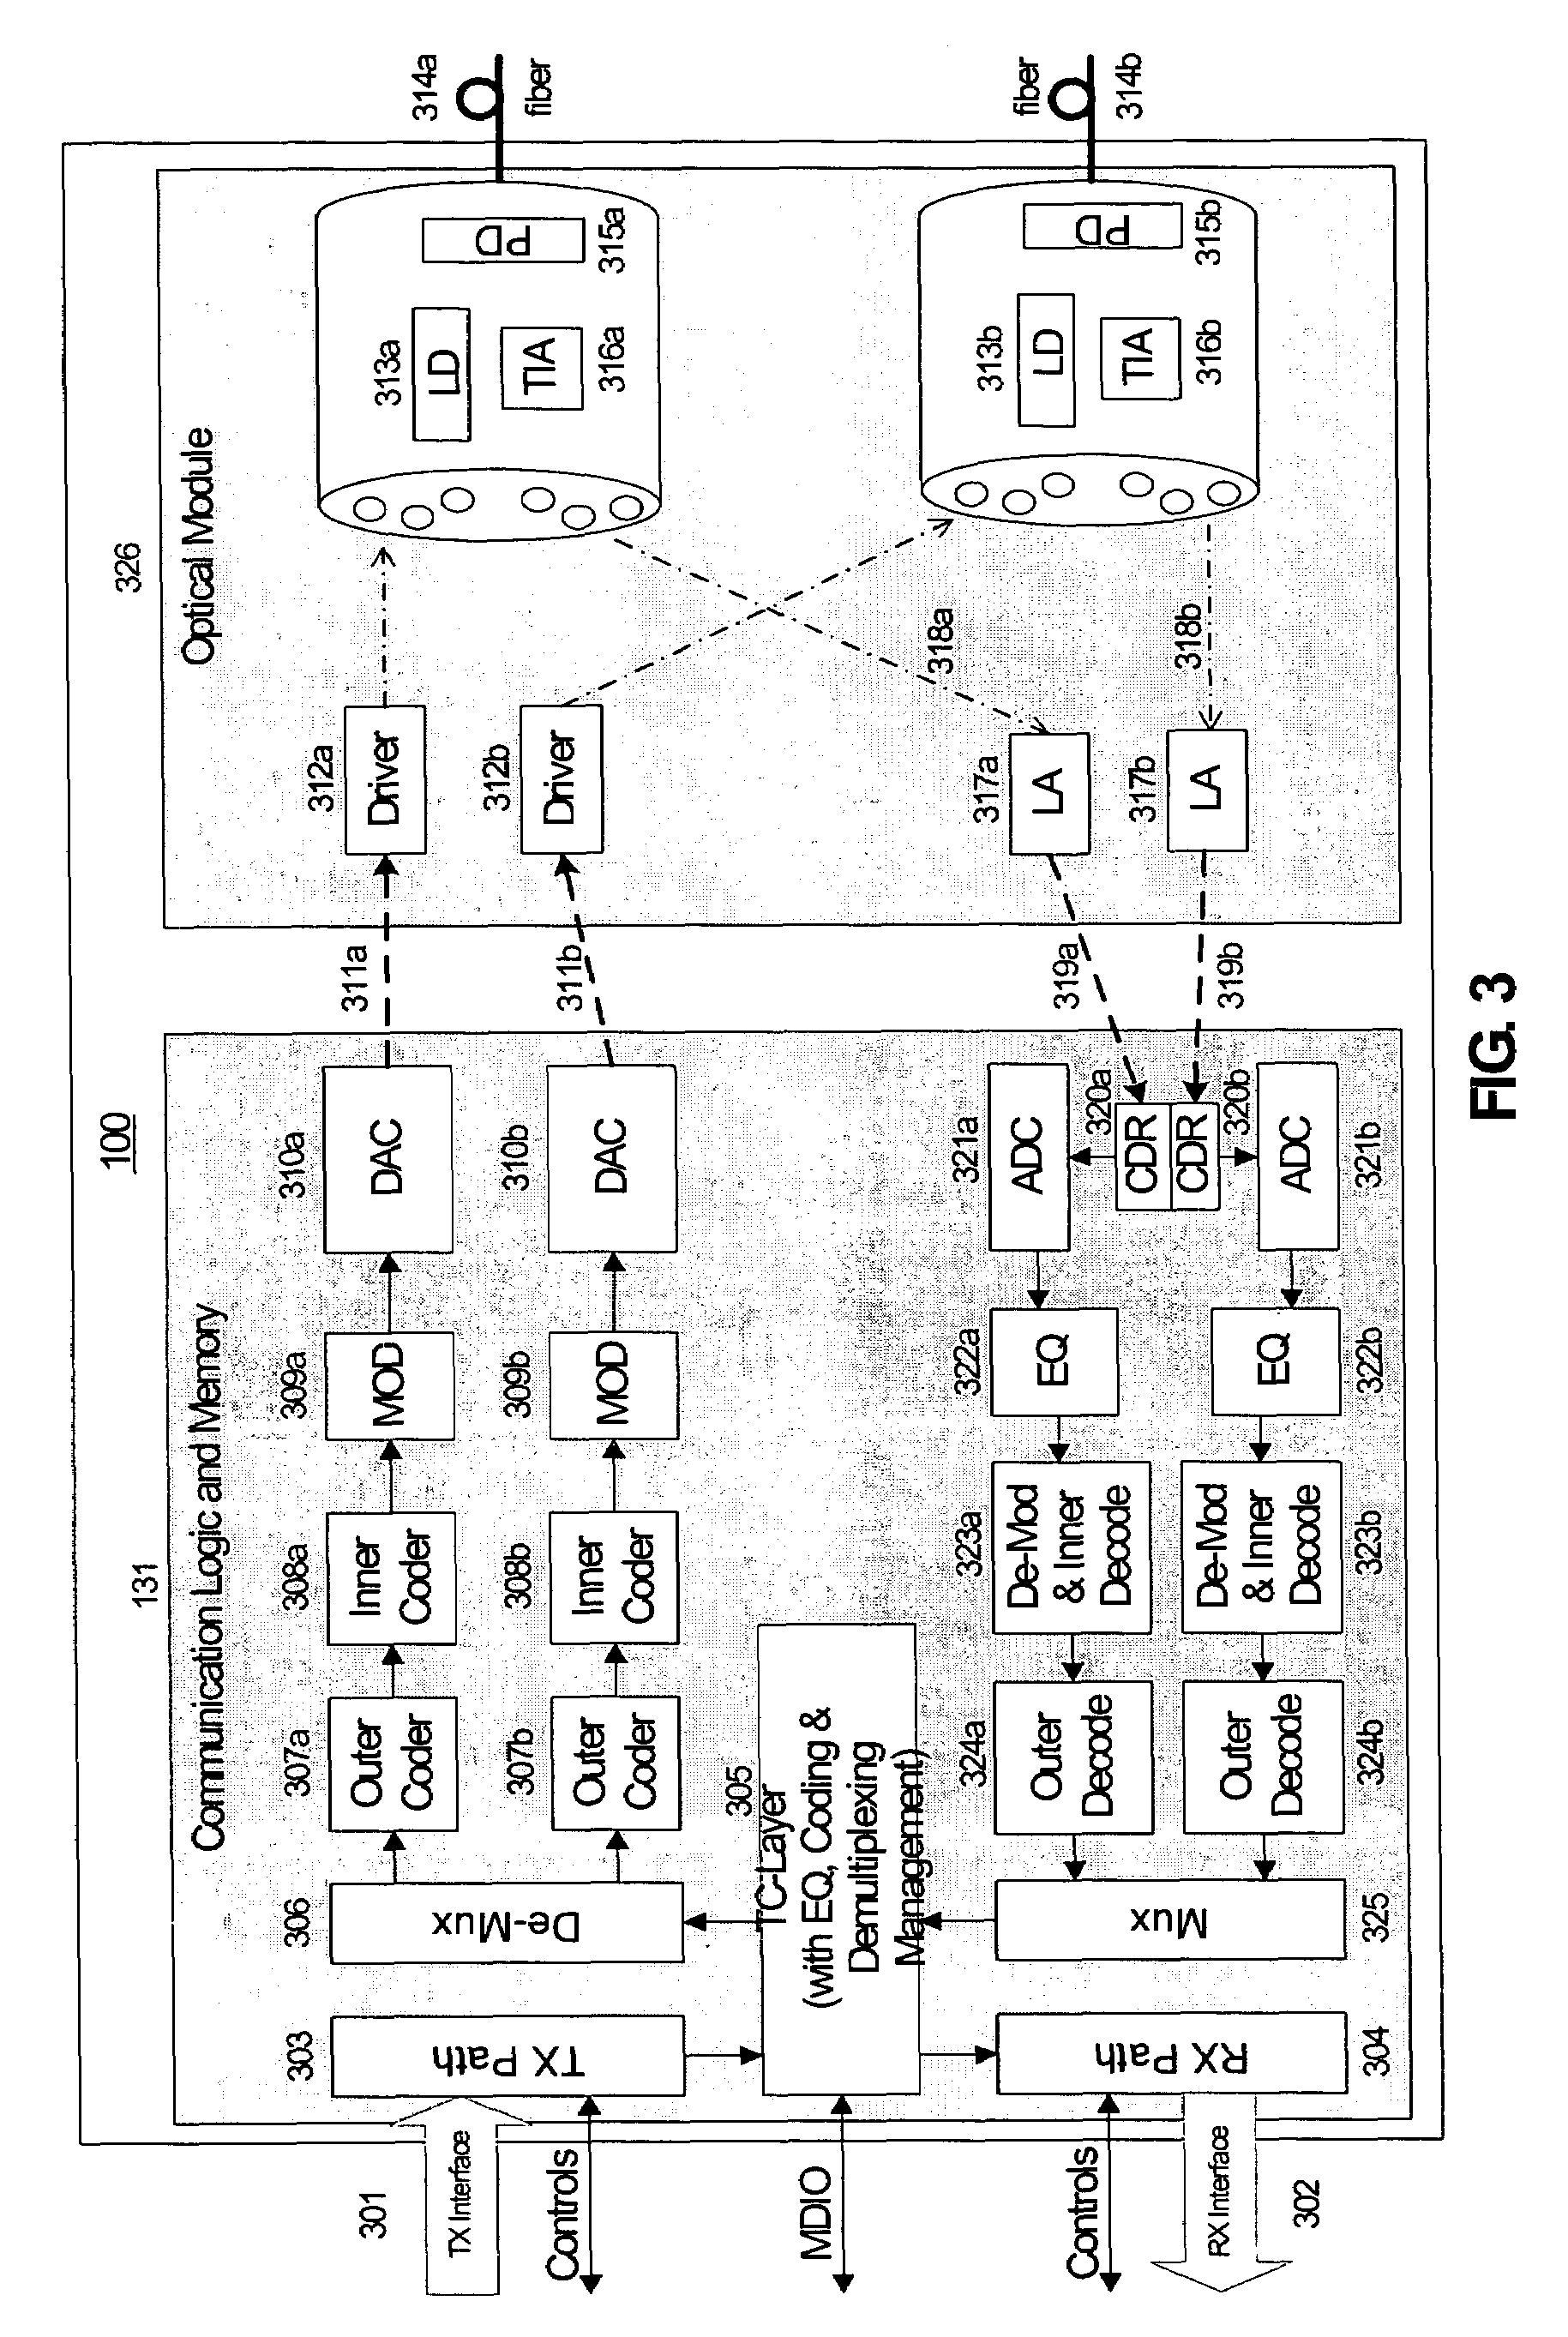 System and method for performing high-speed communications over fiber optical networks